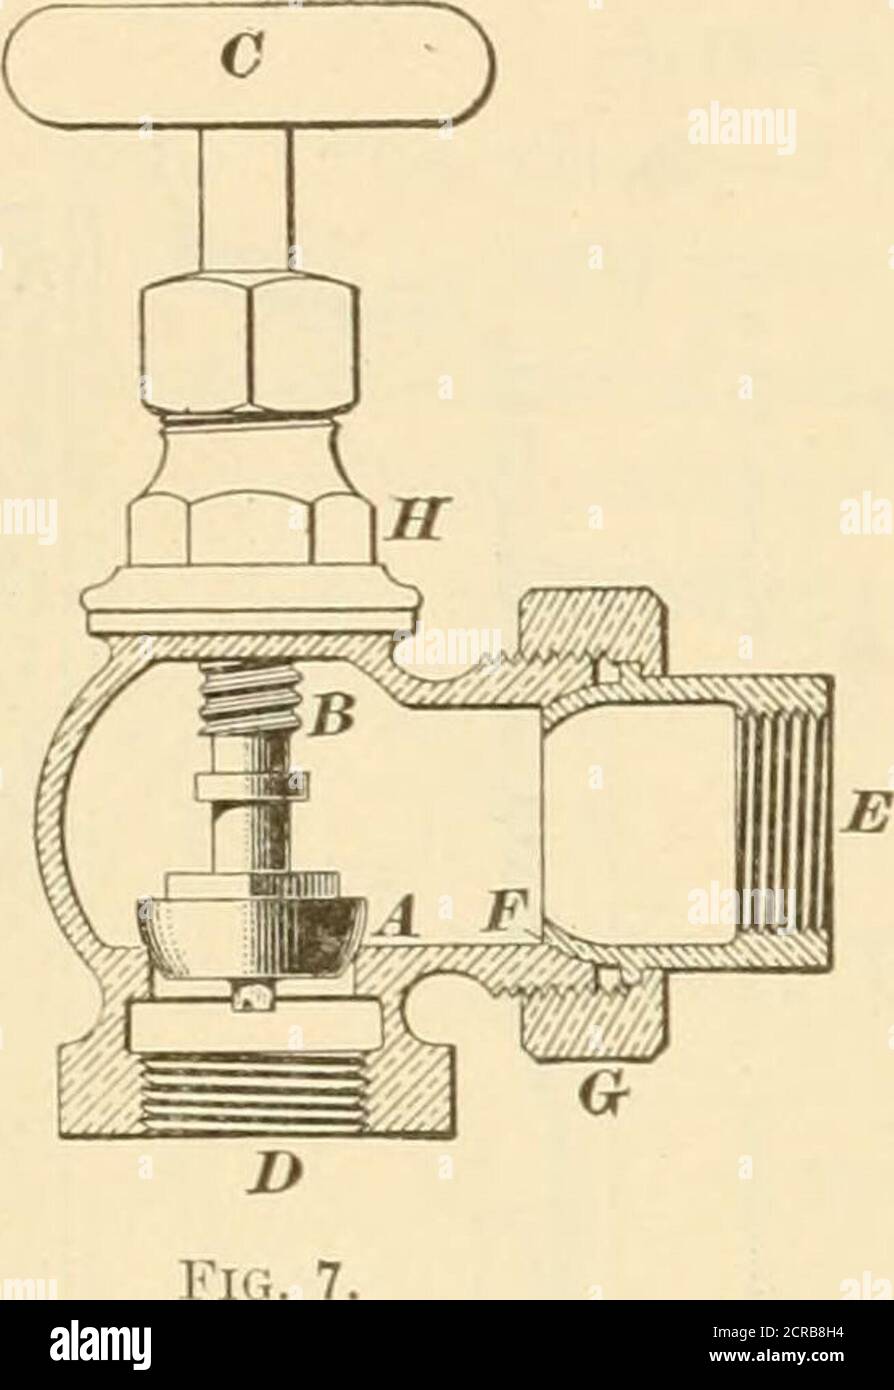 . A textbook on the locomotive and the air brake . 20 CAR HEATING. §13 STOP-VALVE. 27. In Fig. 7 is illustrated the stop-valve used in con-nection Avith the Gold system oftrain heating. It is an ordinaryhard-seat valve, and needs but littledescription. The valve A, which isground on to its seat, is carried bythe valve stem B, which is operatedby the wheel handle C. The pipethat brings the steam supply fromthe boiler connects at D, while thepipe that leads to the regulator con-nects at E, being tightened up on toits seat F (which is a ground joint)by the union G. By means of this valve, the eng Stock Photo